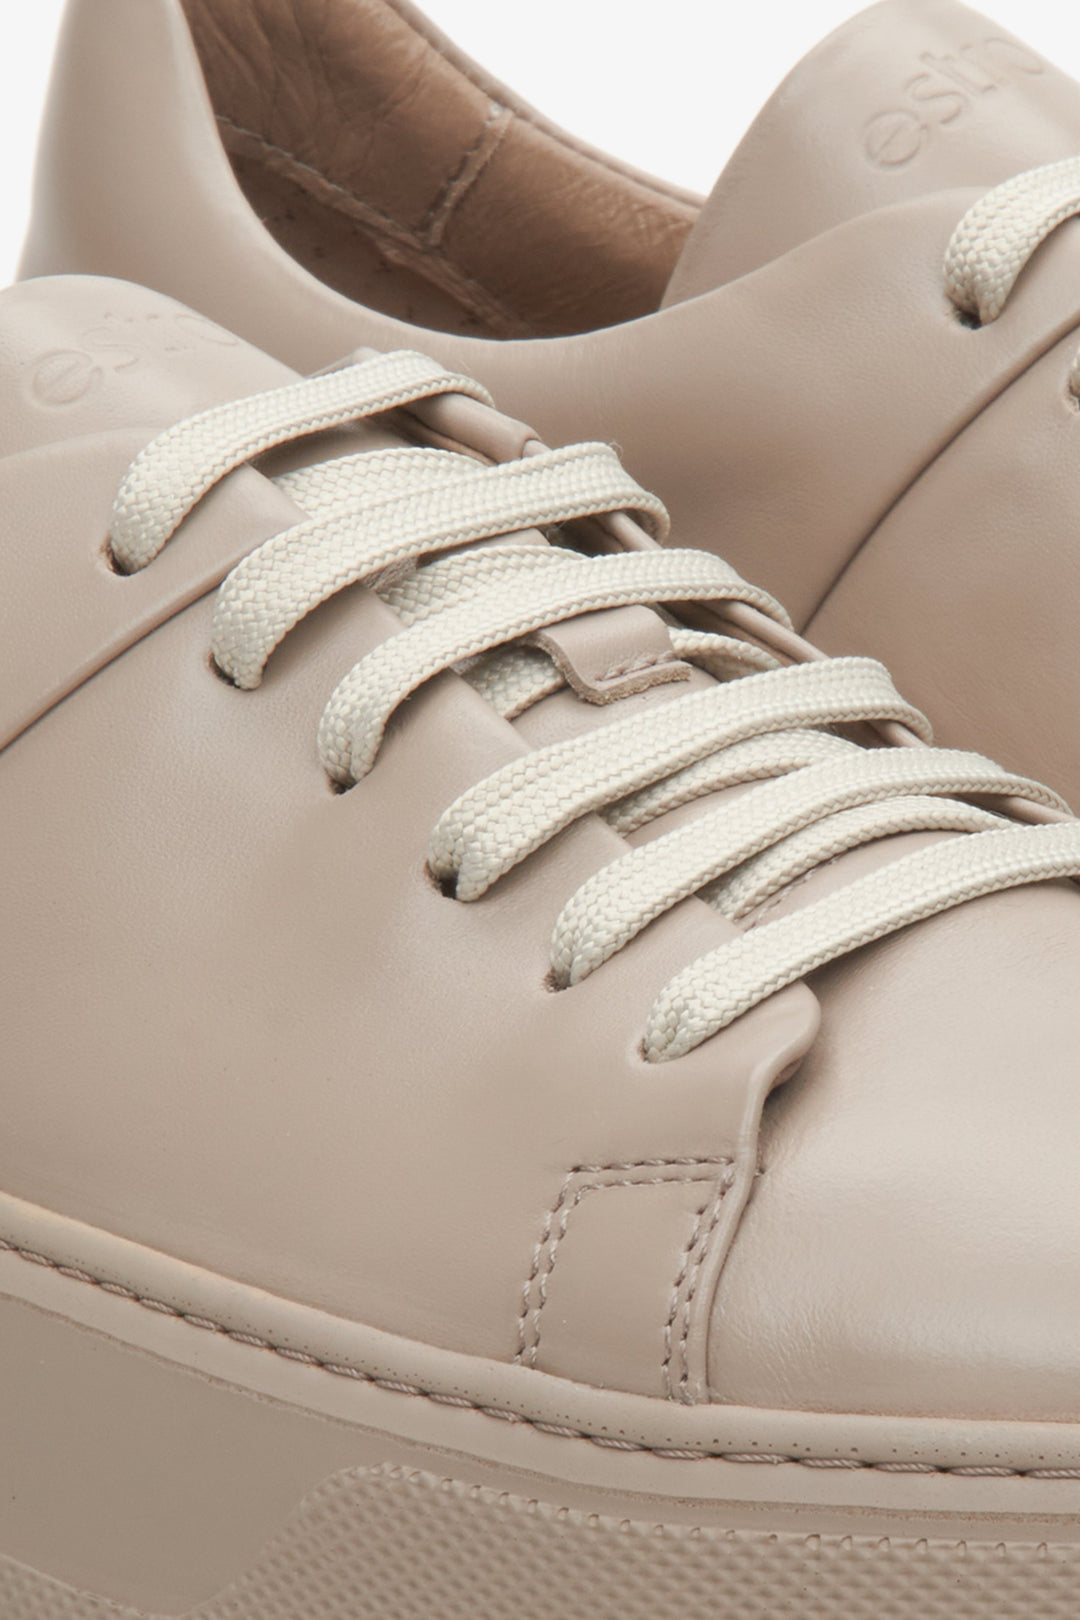 Leather women's sneakers in beige by Estro with laces - close-up on the details.